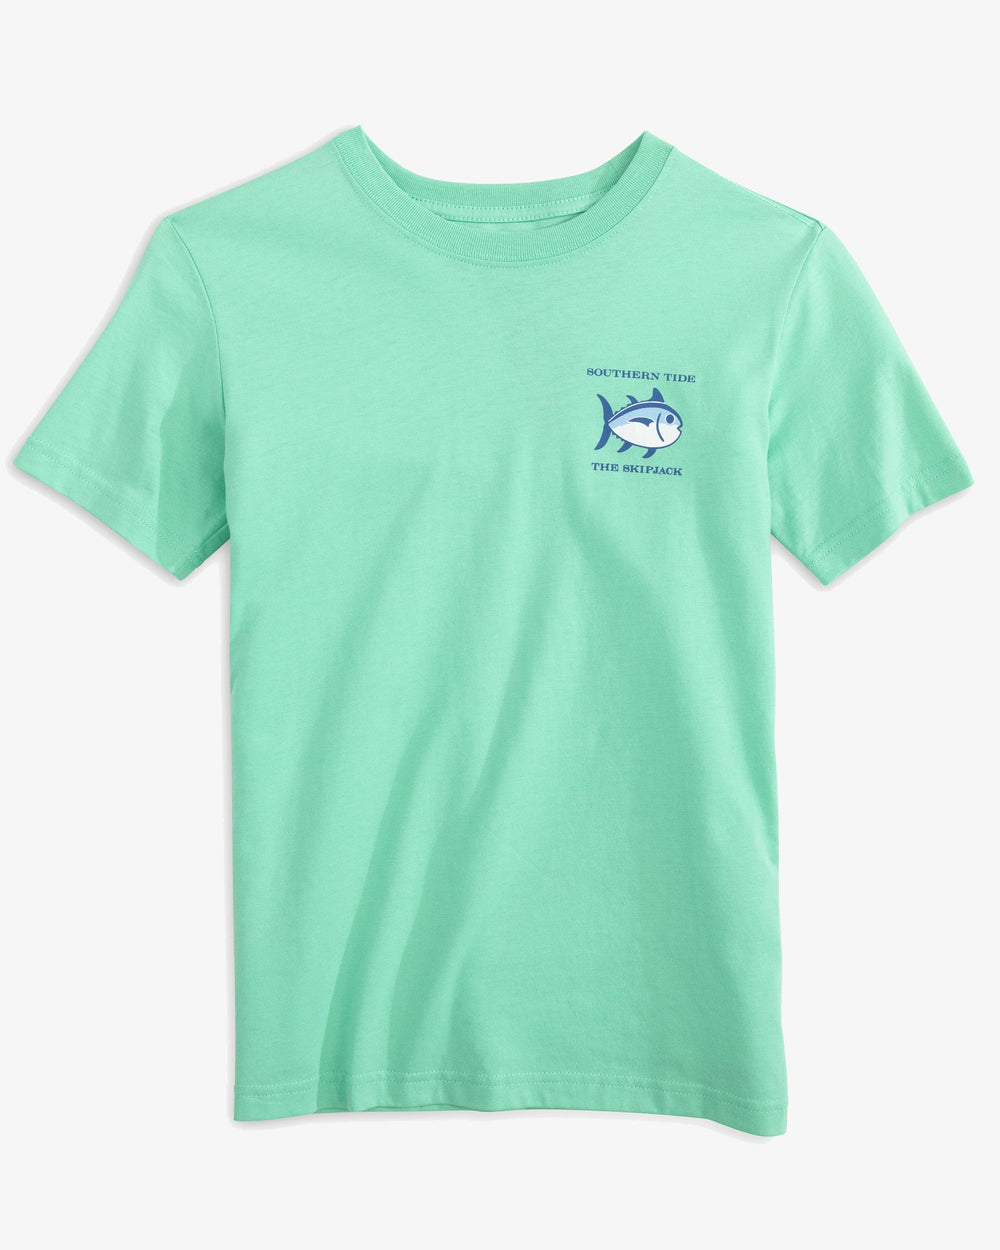 The front view of the Kids Original Skipjack T-shirt by Southern Tide - Isle of Pines